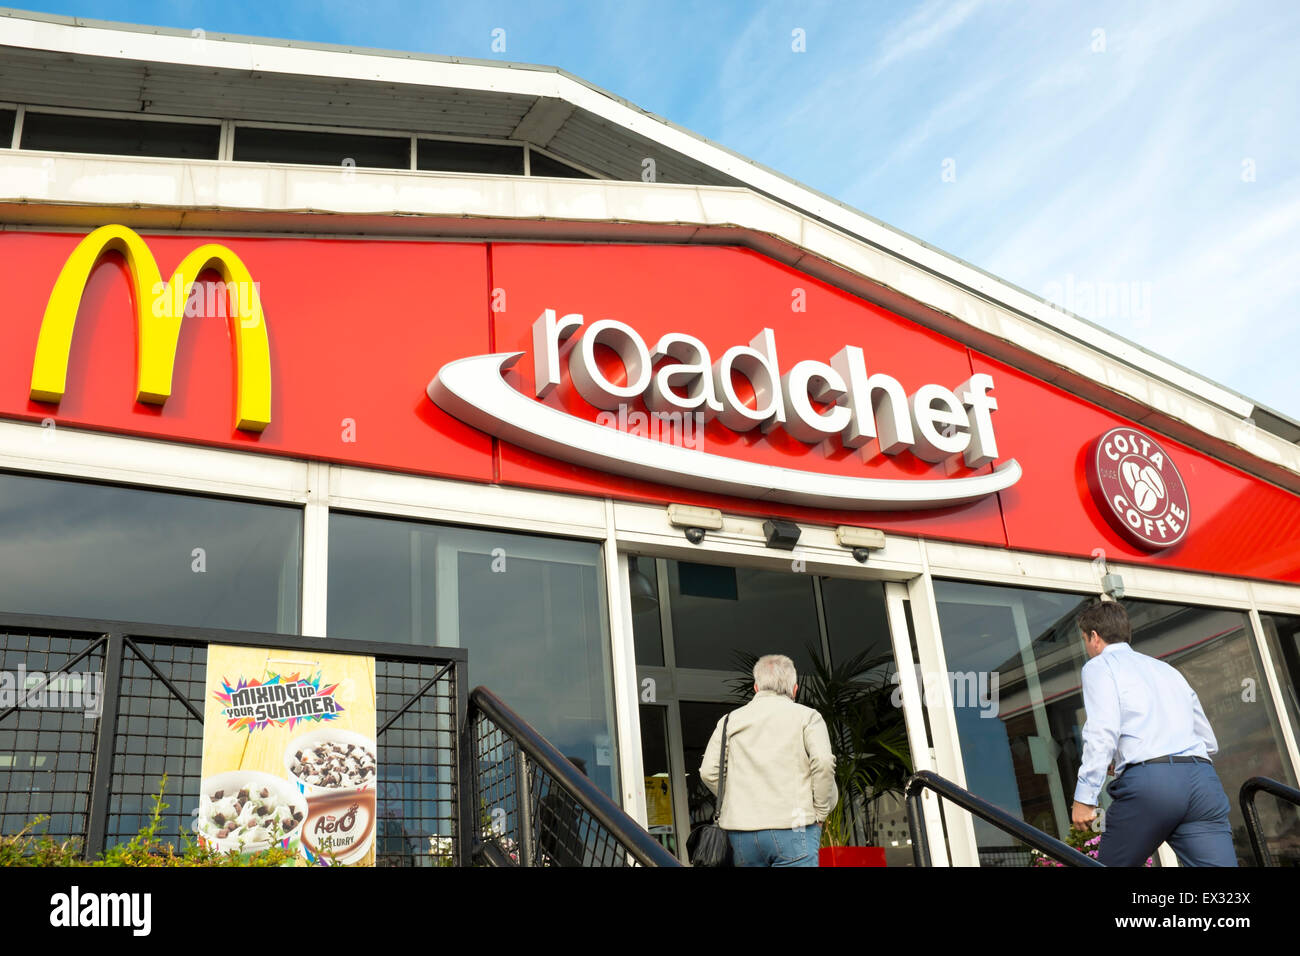 Roadchef motorway service station sign with McDonalds and Costa Coffee signs Stock Photo